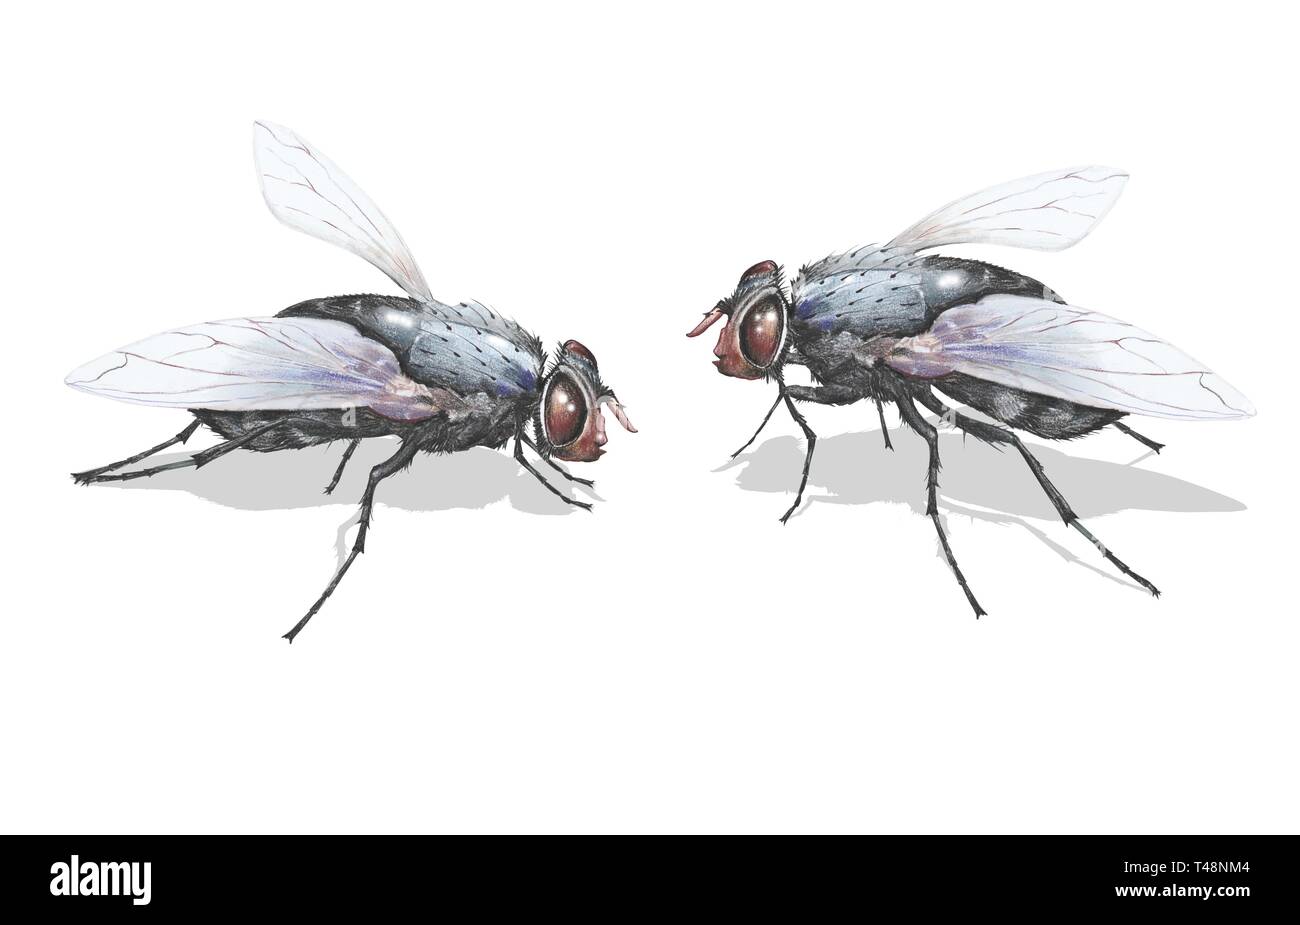 House fly (Musca domestica), two animals, clipping, background white, Germany Stock Photo